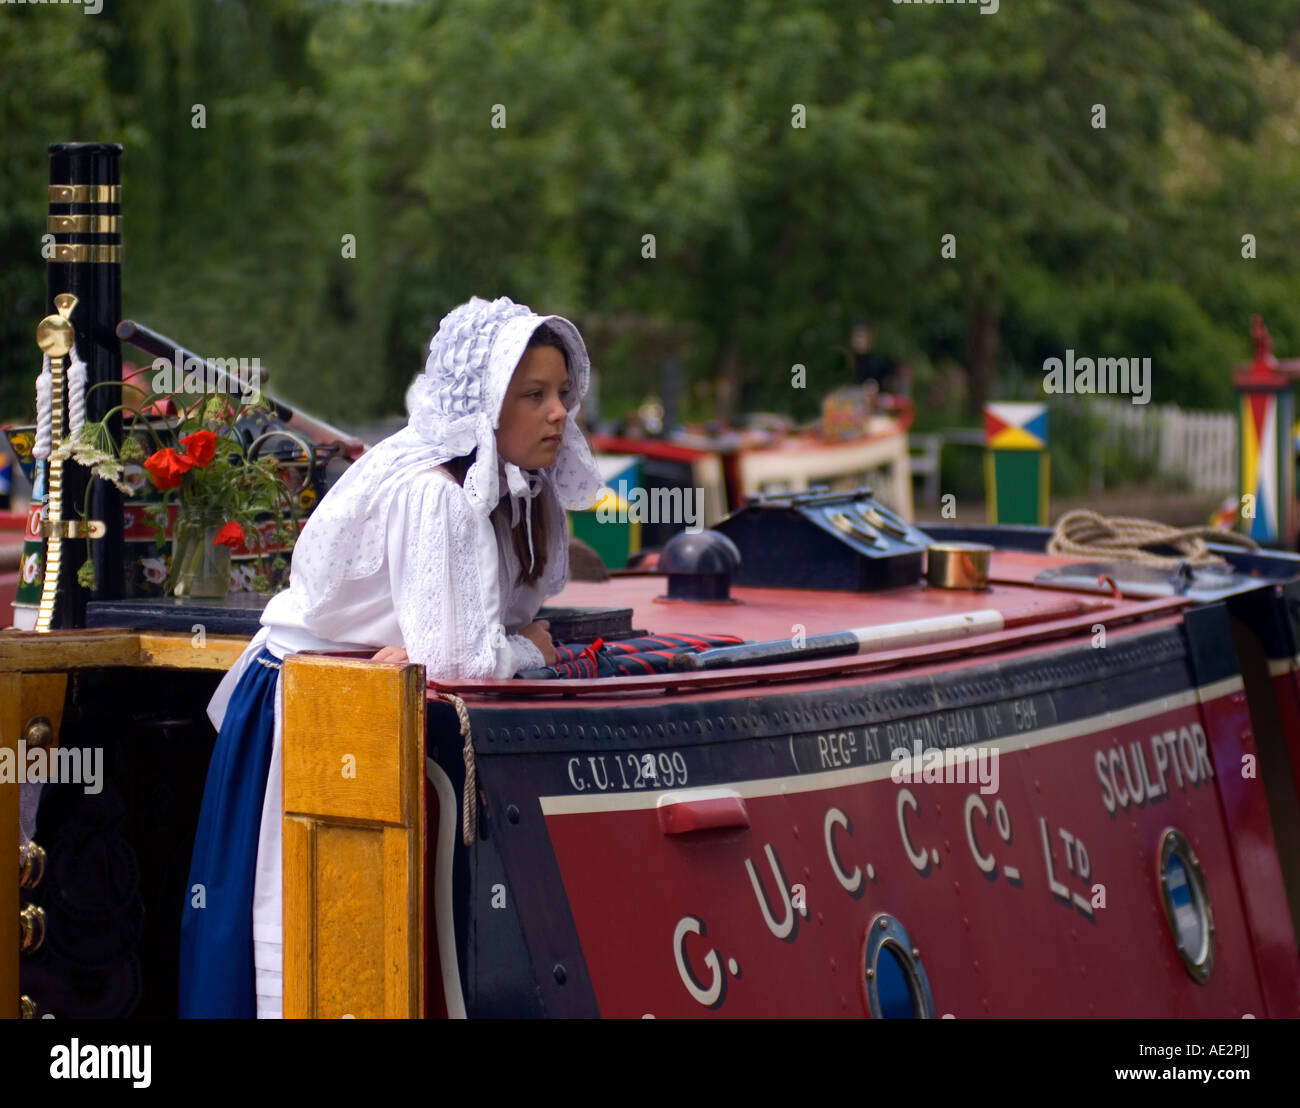 Traditional historic GUCC Ltd narrowboat Sculptor with girl in traditional working cut dress moored at Stoke Bruerne Stock Photo